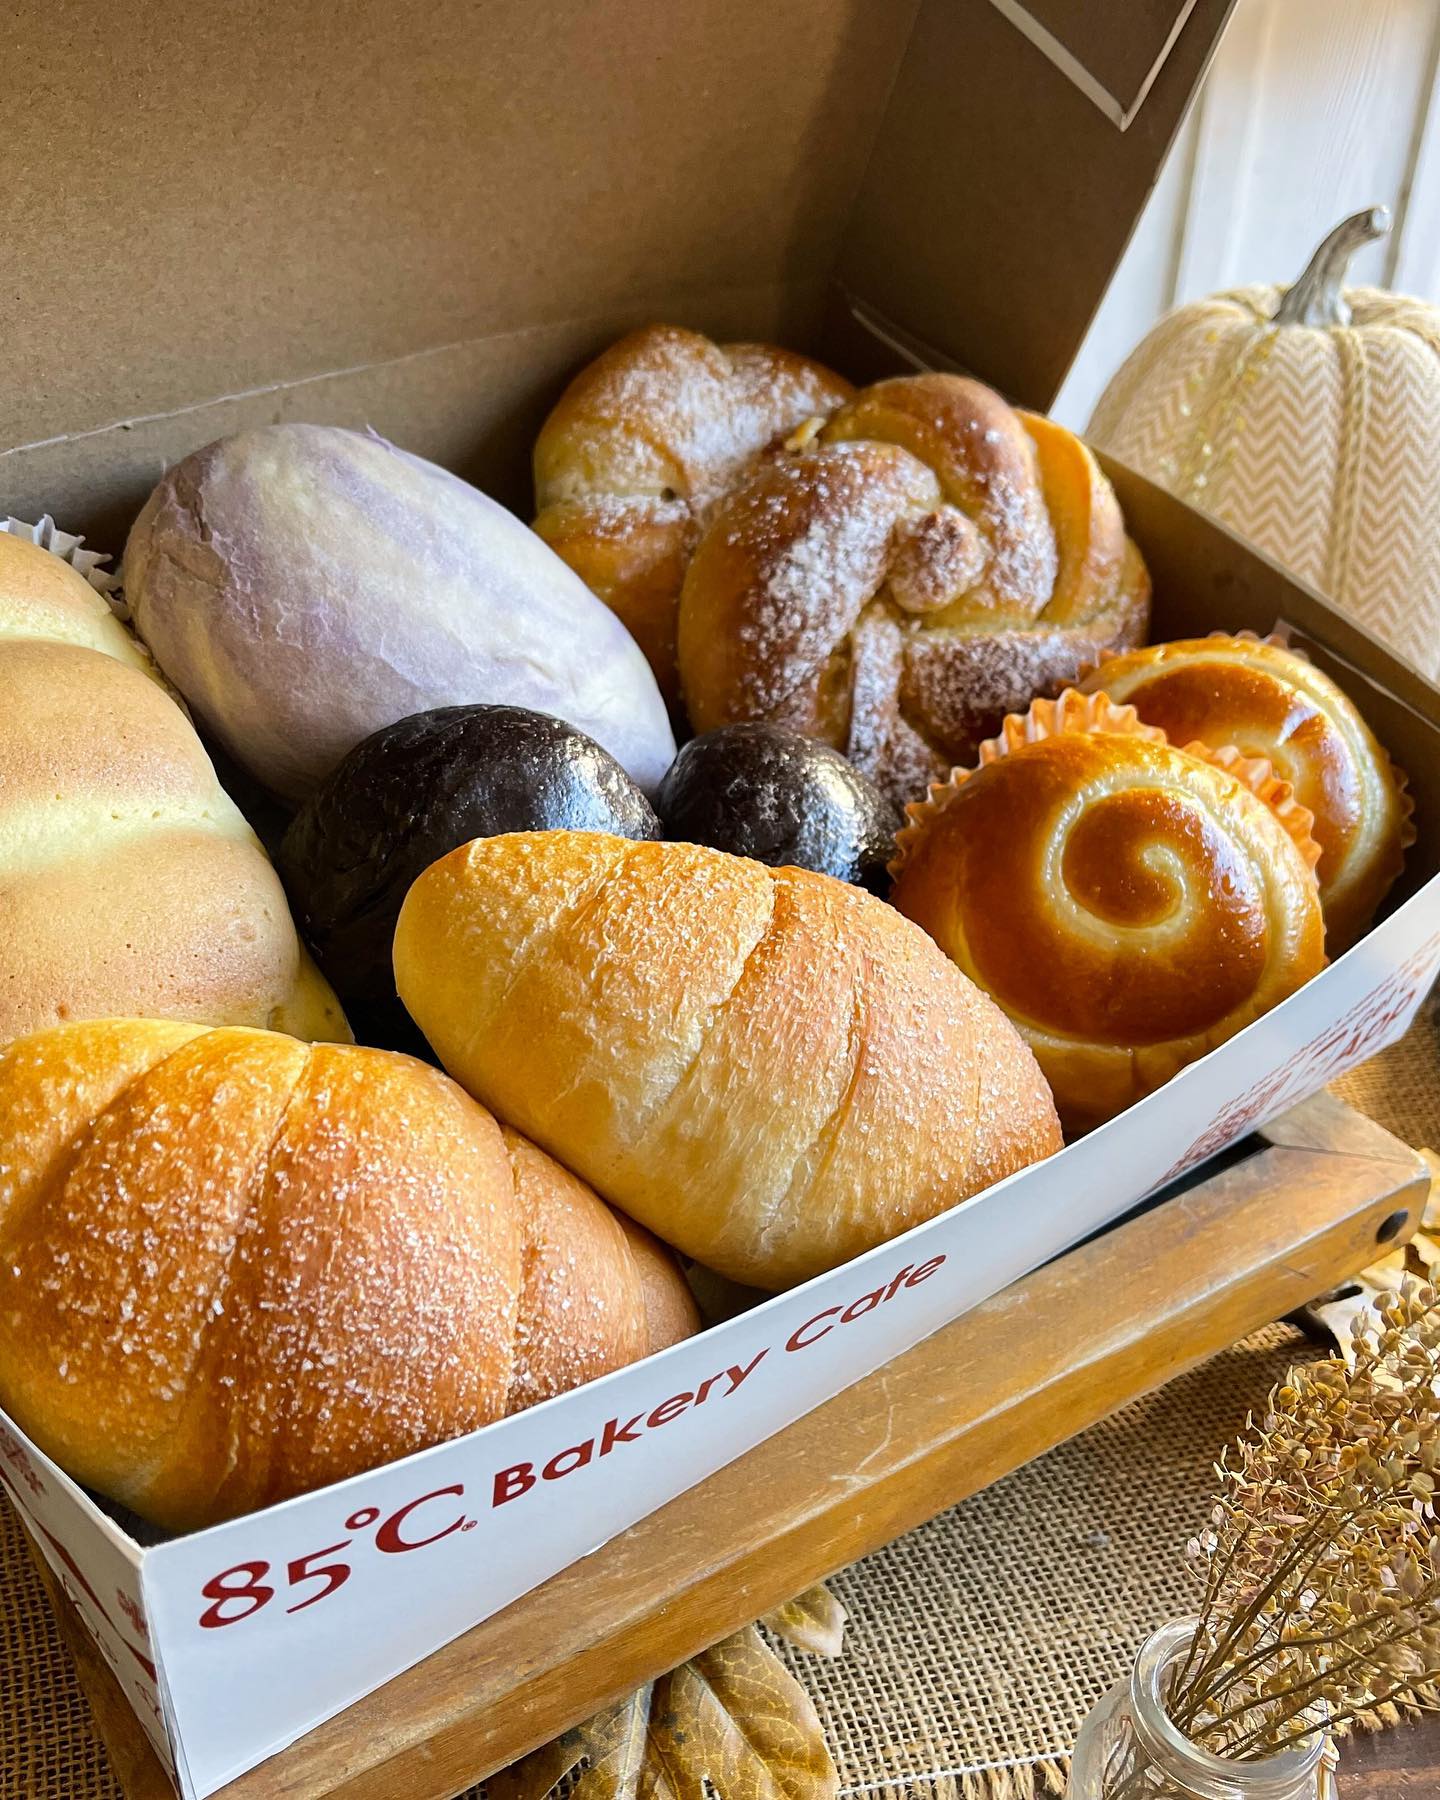 Bakery Delivery Near Me in Irvine, CA - Order Dessert, Cake, Donuts, Bagels